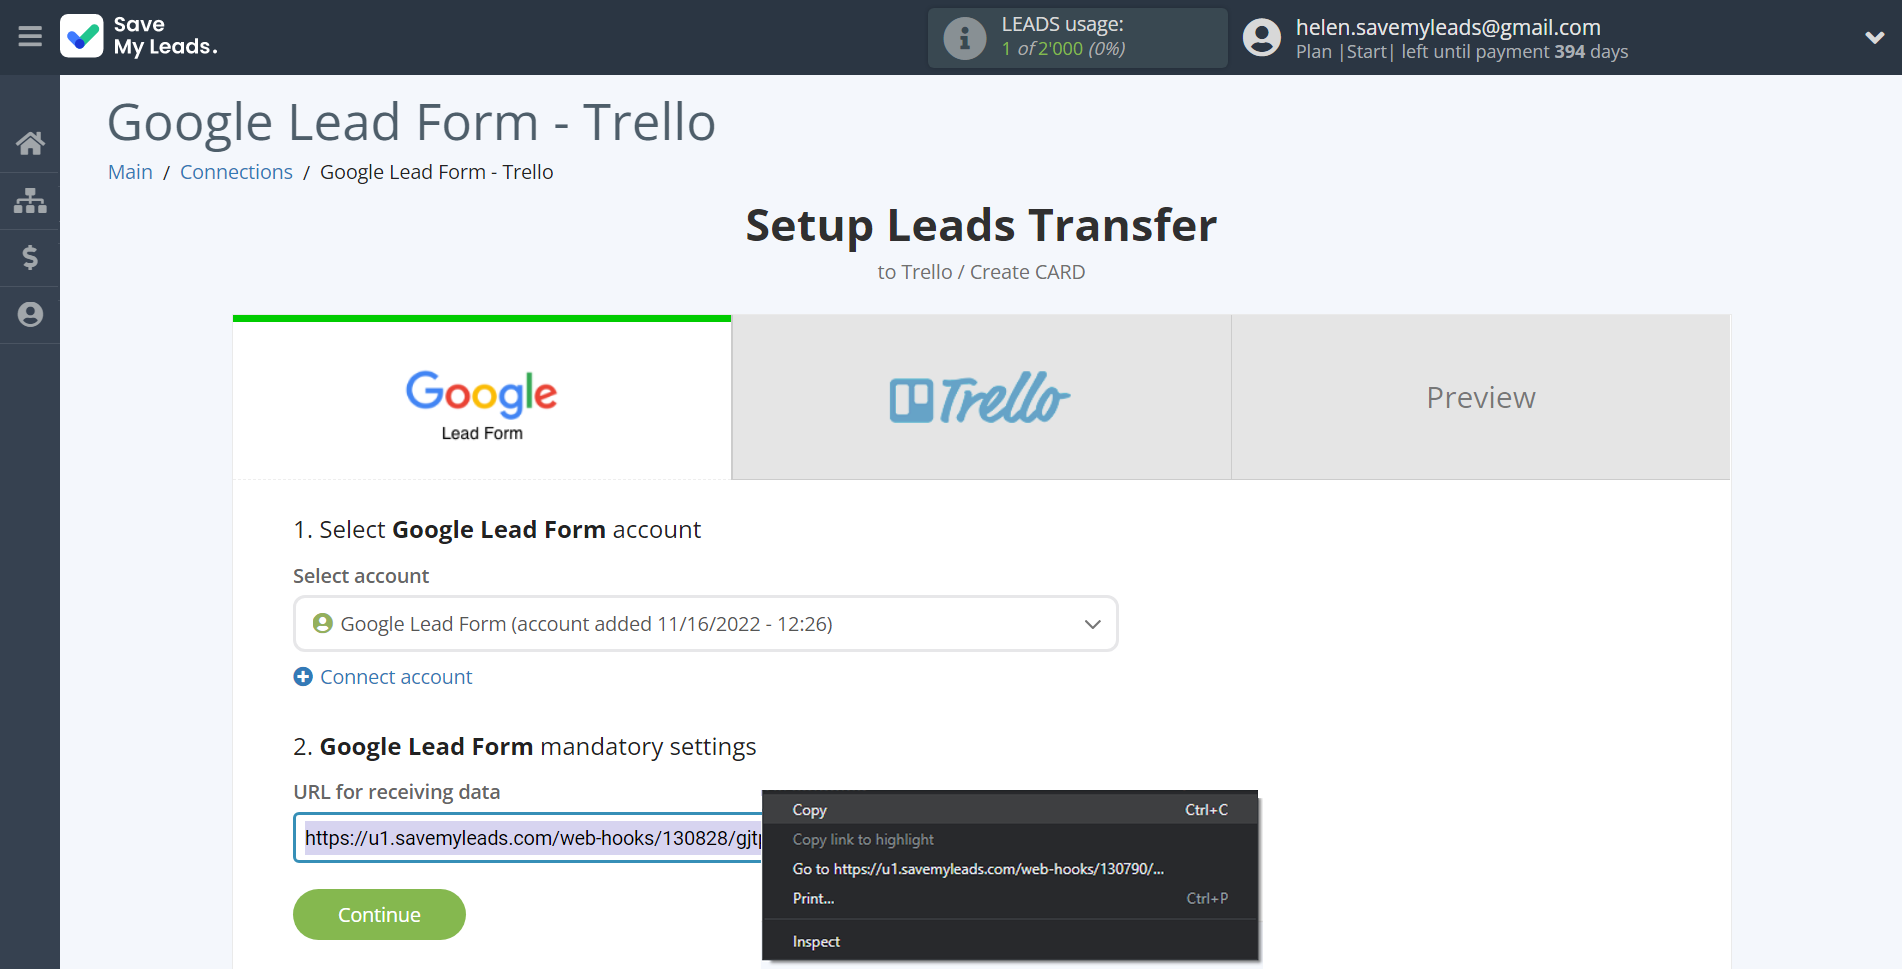 How to Connect Google Lead Form with Trello | Data Source account connection